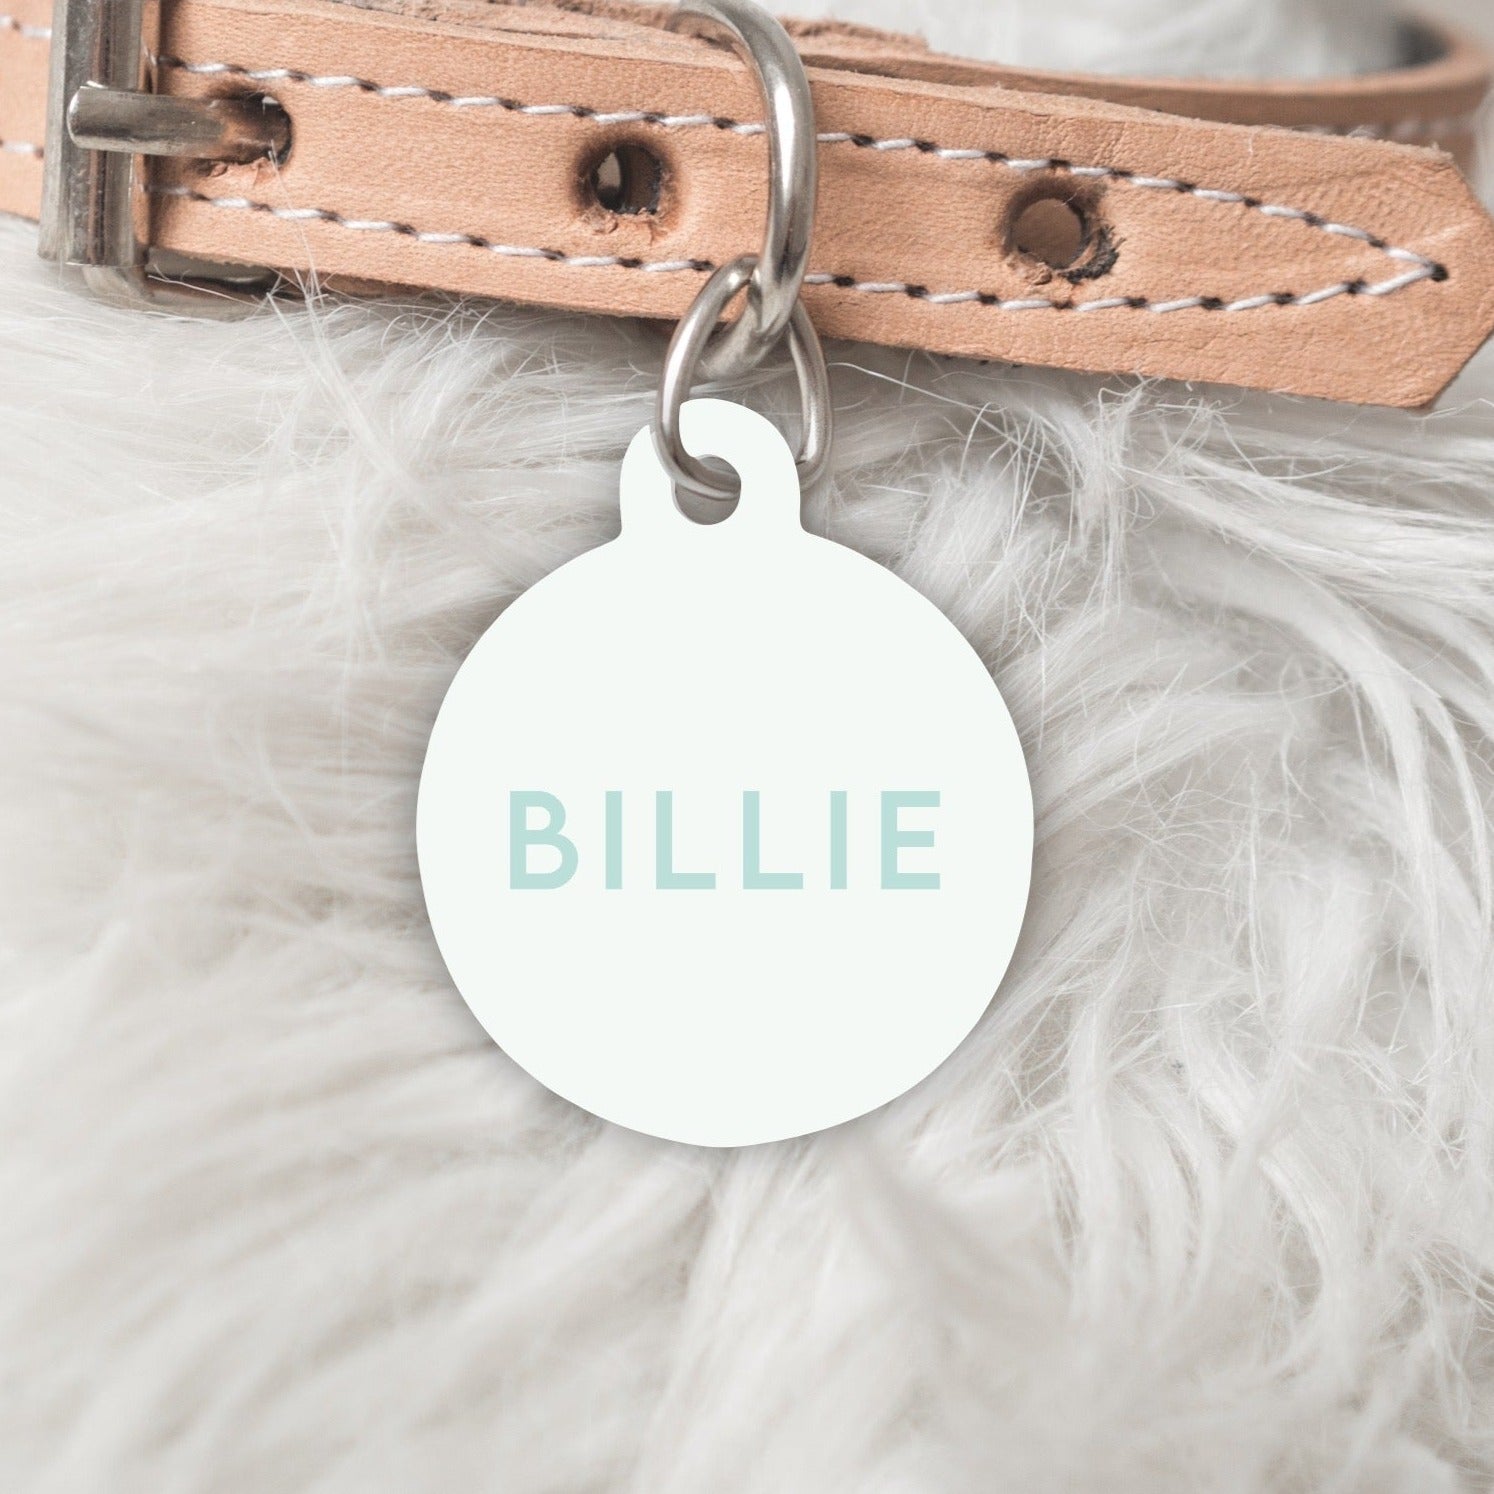 Colour Pop Pastel Green Personalised Pet dog or cat ID Tag